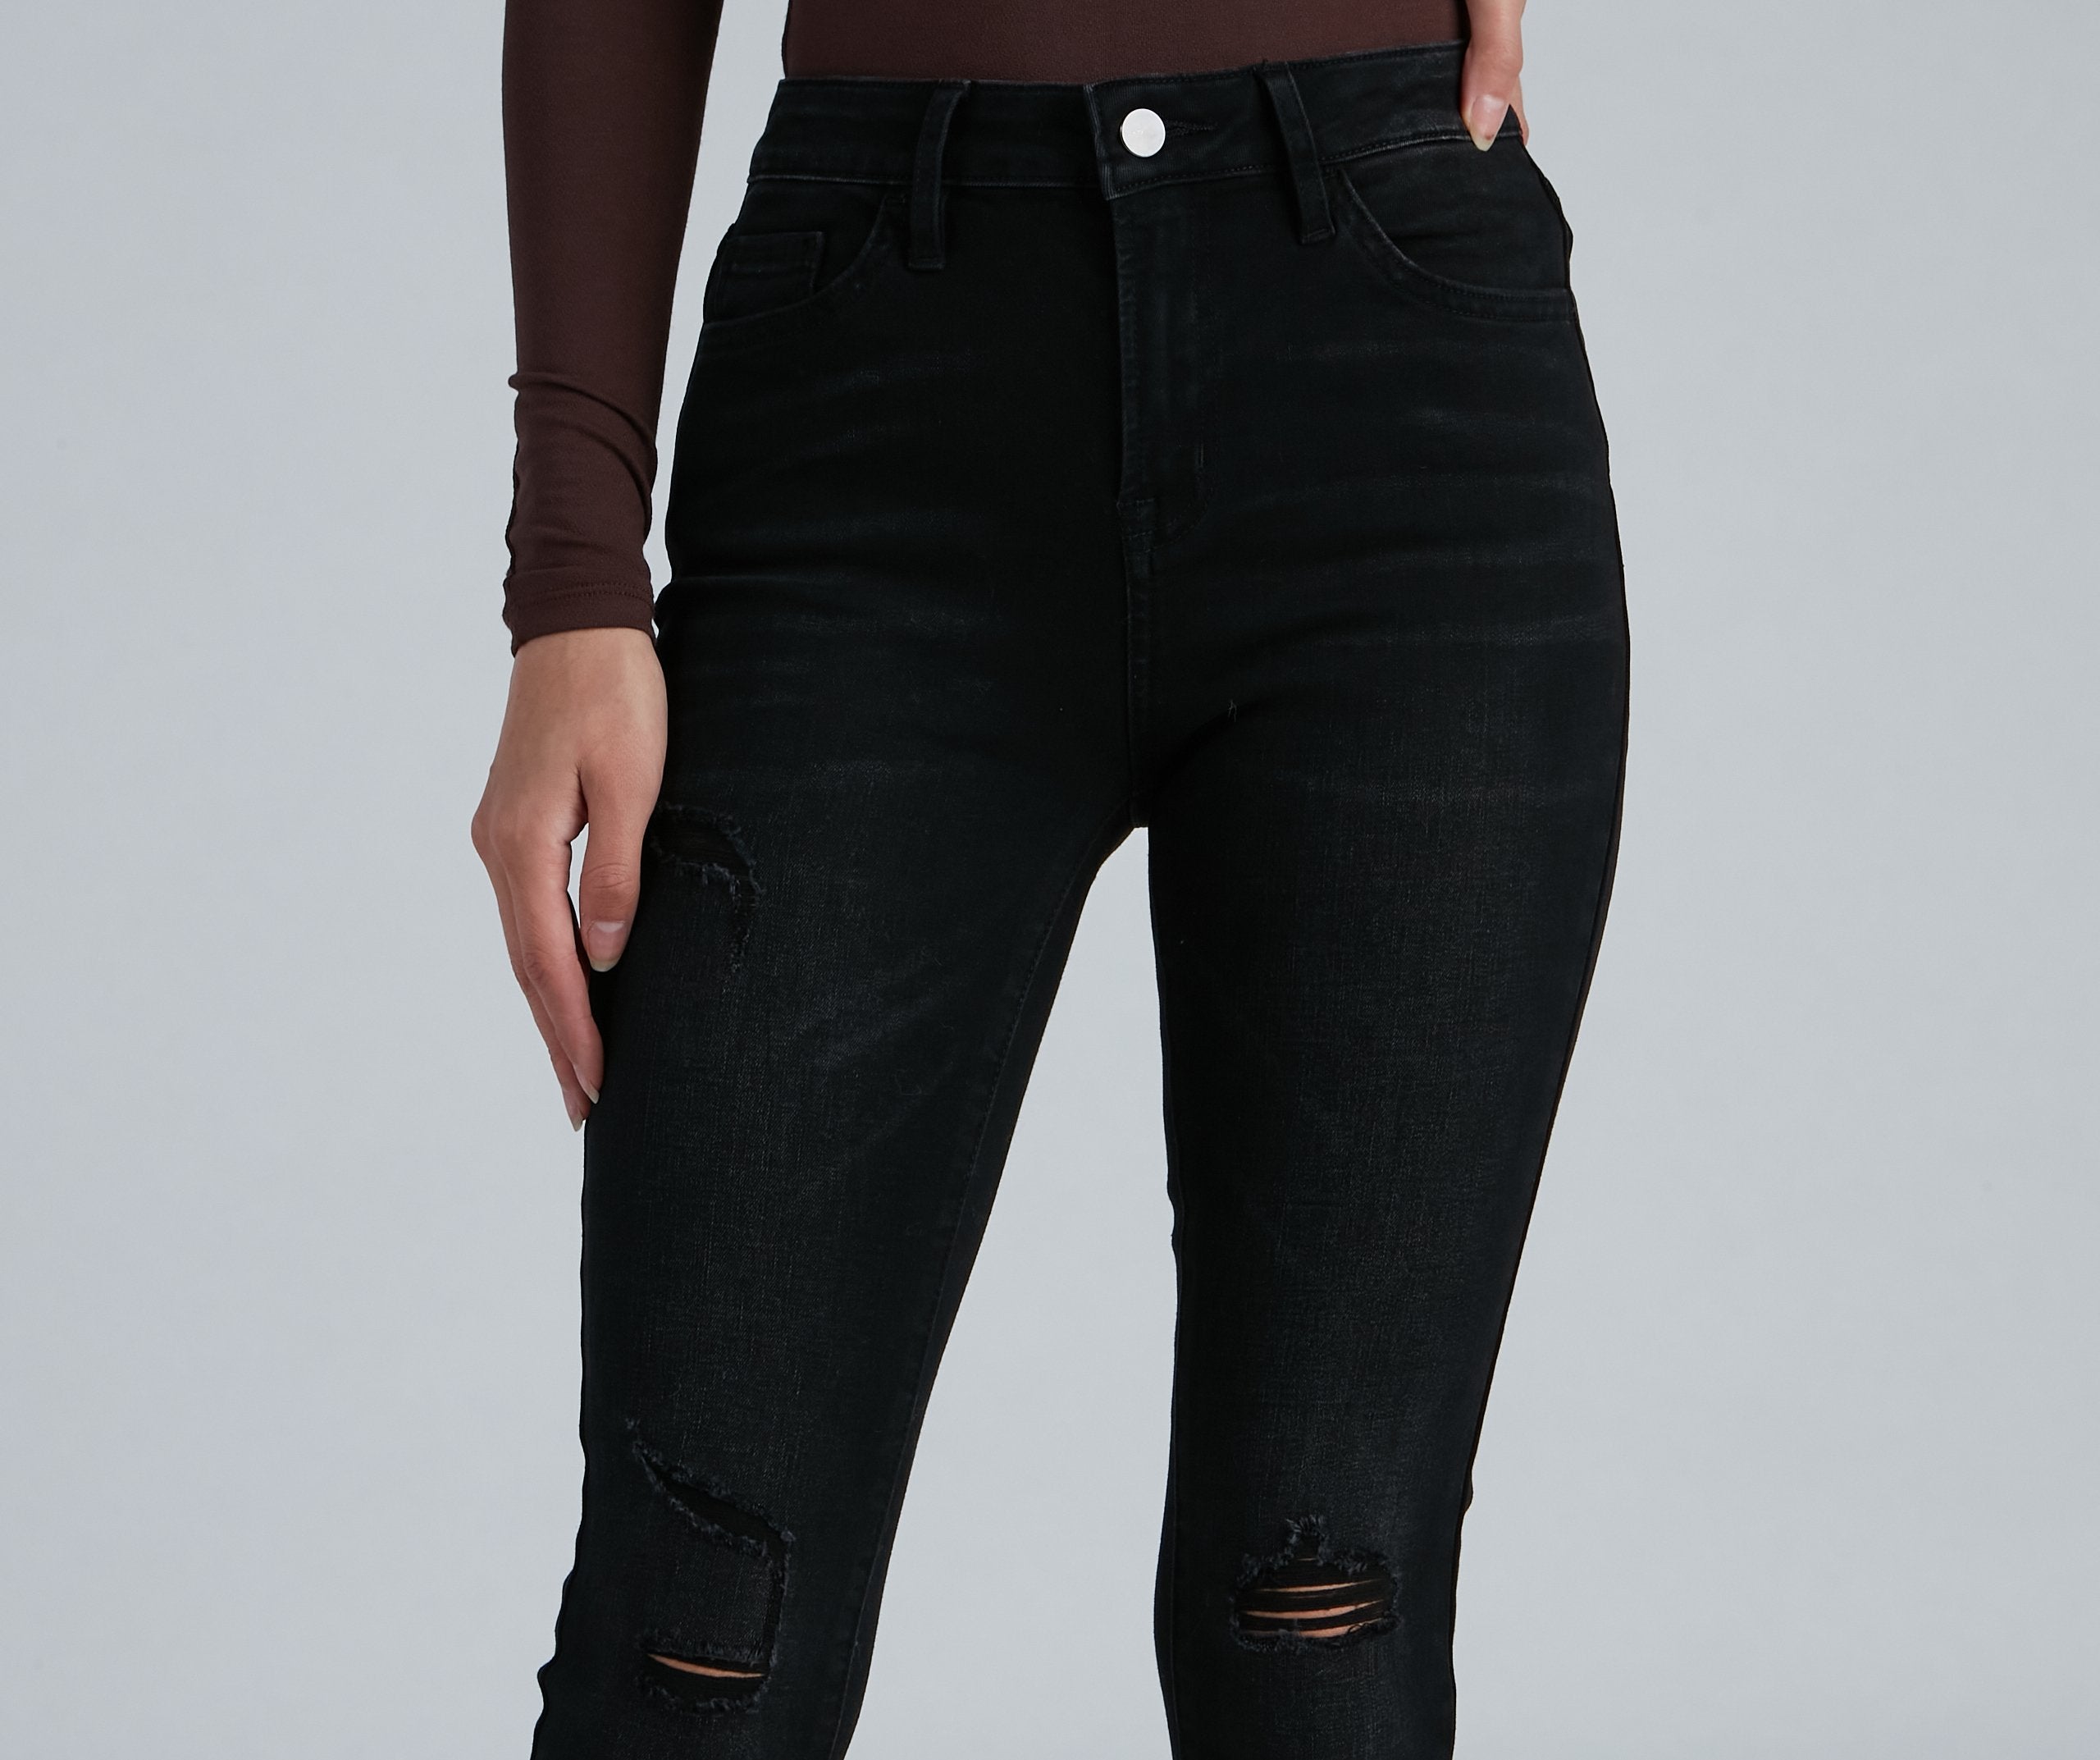 New In Town Mid-Rise Distressed Crop Skinny Jeans - Lady Occasions